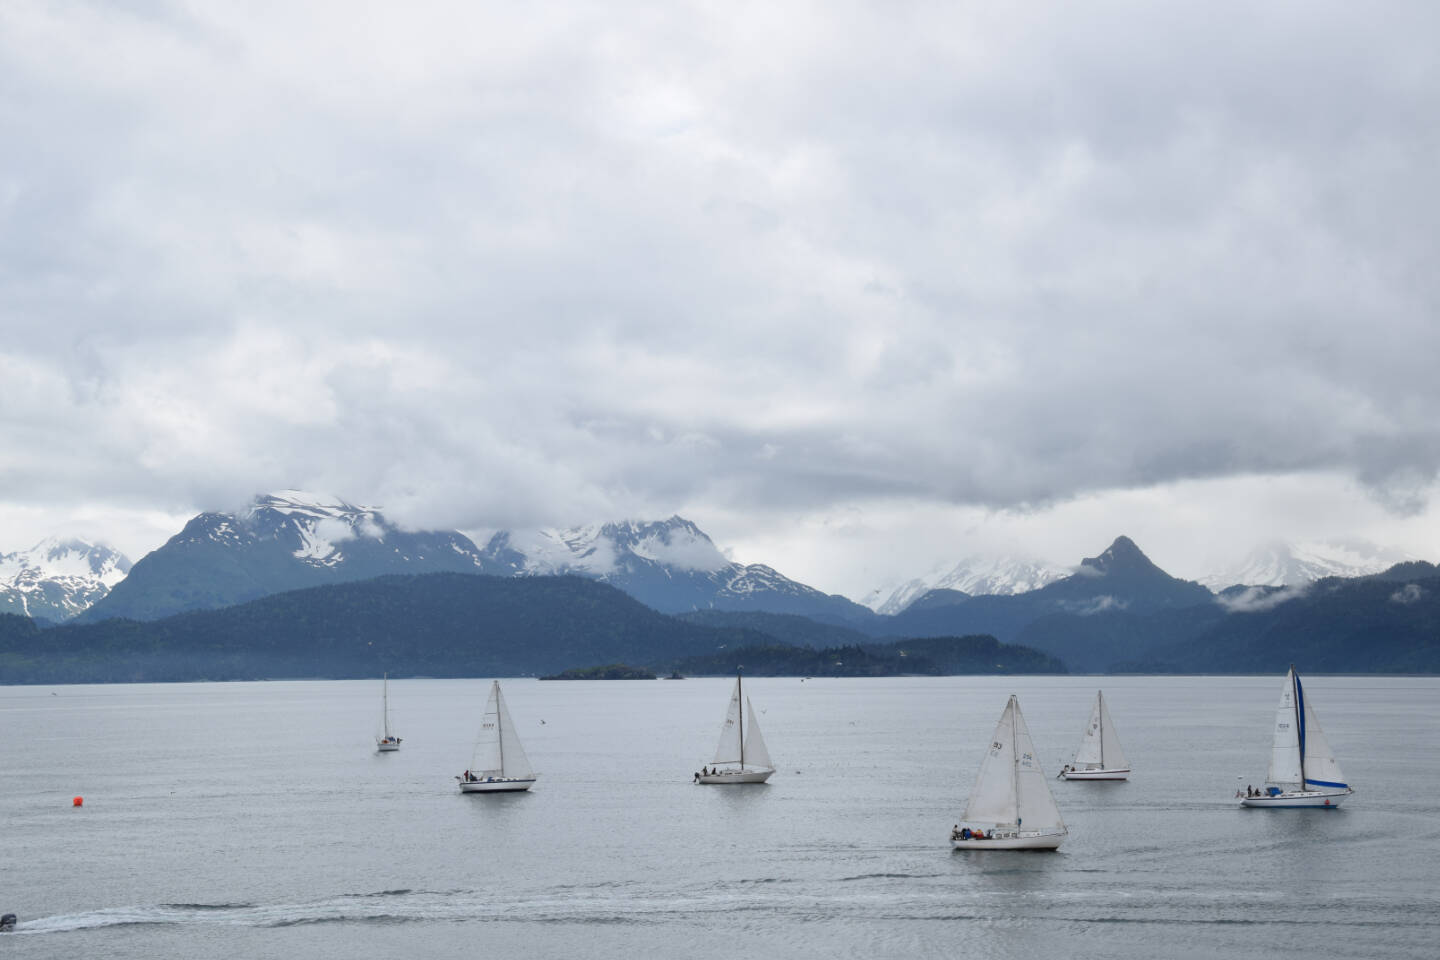 Members of the Homer Yacht Club start the course set for the Homer Yacht Club Regatta on Saturday, June 26, 2023 in the Kachemak Bay below Land’s End Resort in Homer, Alaska. The orange buoy, left, marks the starting point of Saturday’s course, the route of which was revealed to participants minutes before the beginning of the race. (Delcenia Cosman/Homer News)